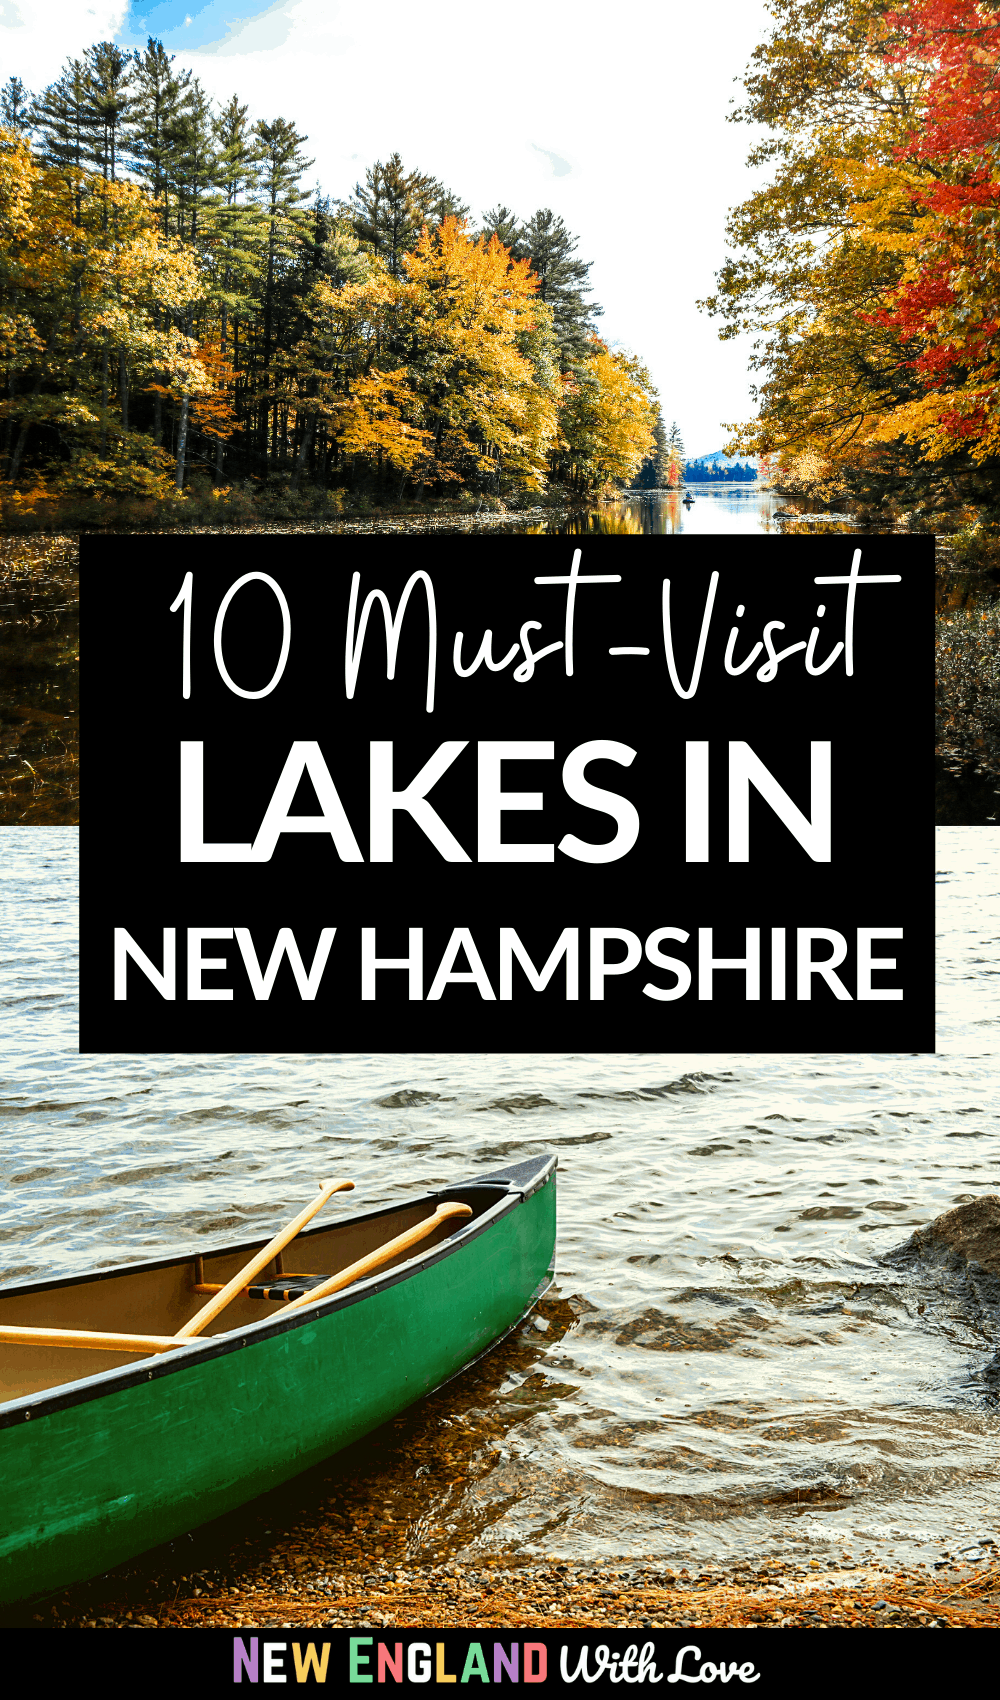 Pinterest graphic reading "10 Must-Visit LAKES IN NEW HAMPSHIRE"